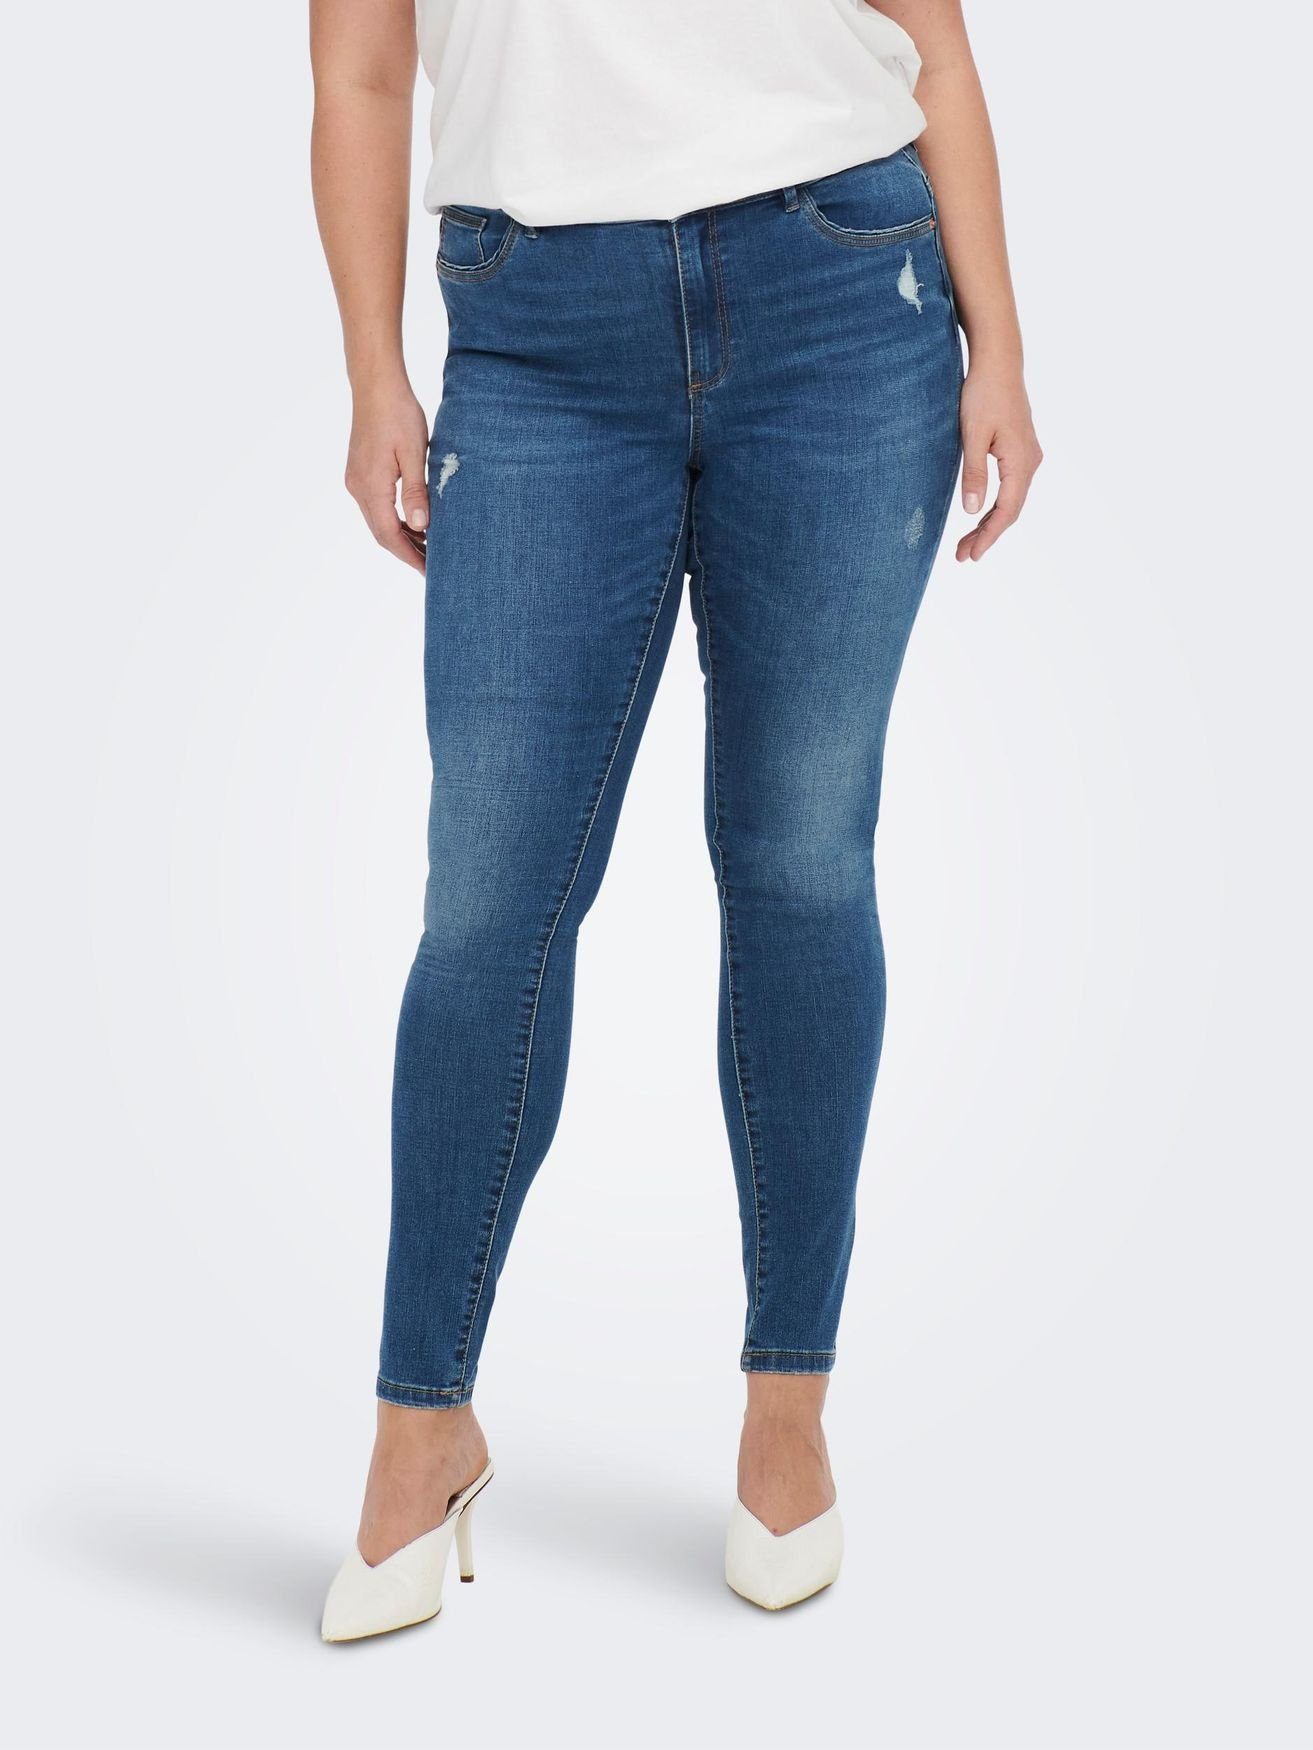 MID Blau CARMAKOMA Skinny-fit-Jeans NOOS in ONLY SKINNY CARSALLY 5289 15263094 BJ114-3 -